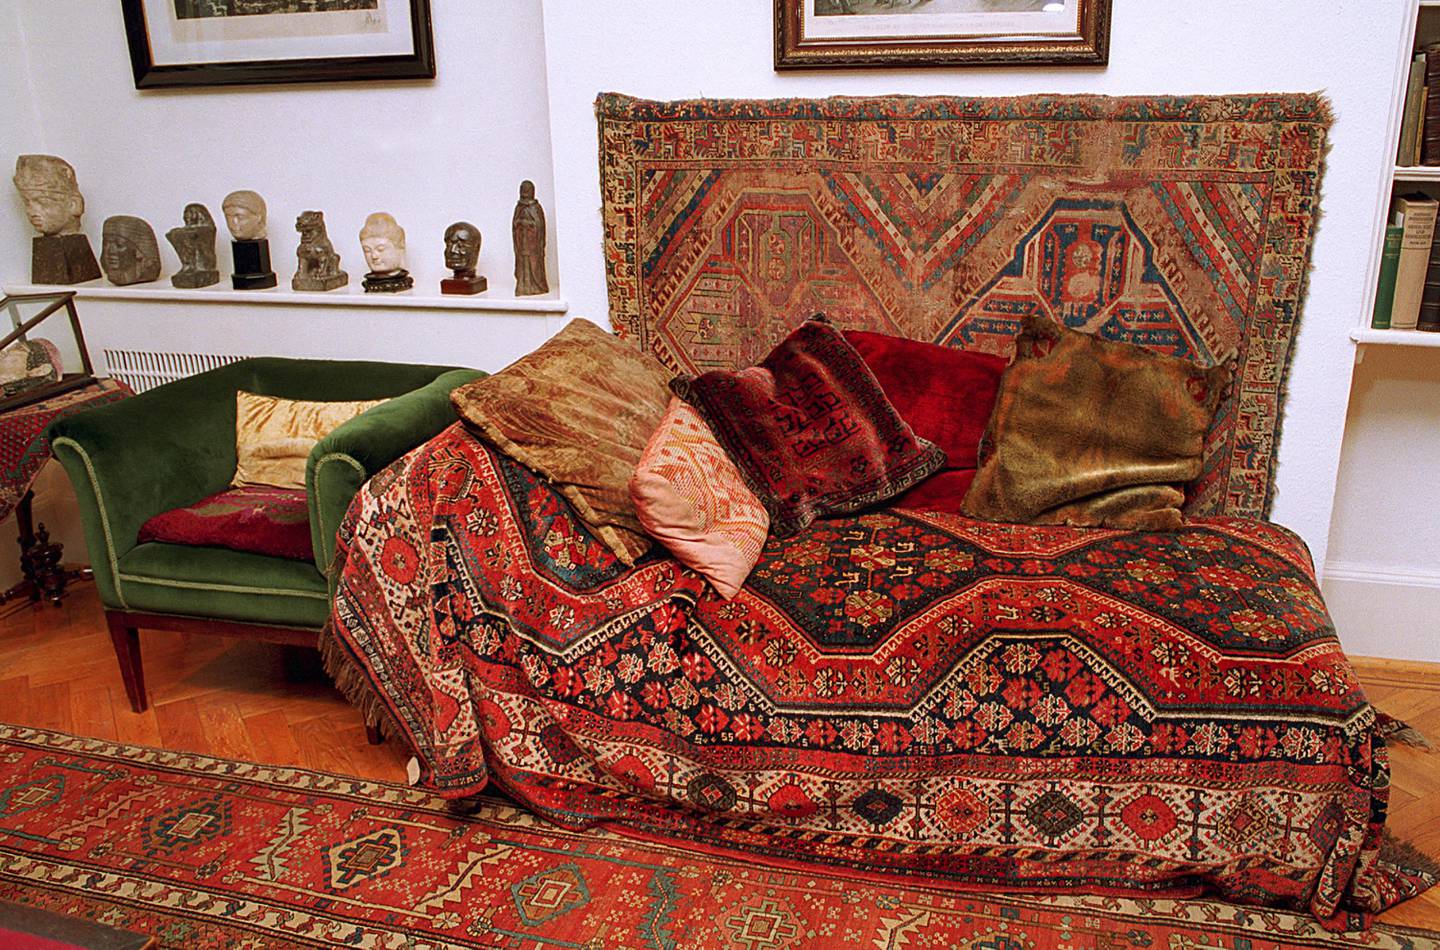 The couch that the psychoanalyst Sigmund Freud used for his patients, draped with a Persian rug, is shown in the Sigmund Freud Museum in London, England in 1990.  The museum, which officially opened in July 1986, is housed in Freud's former home.  (AP Photo)